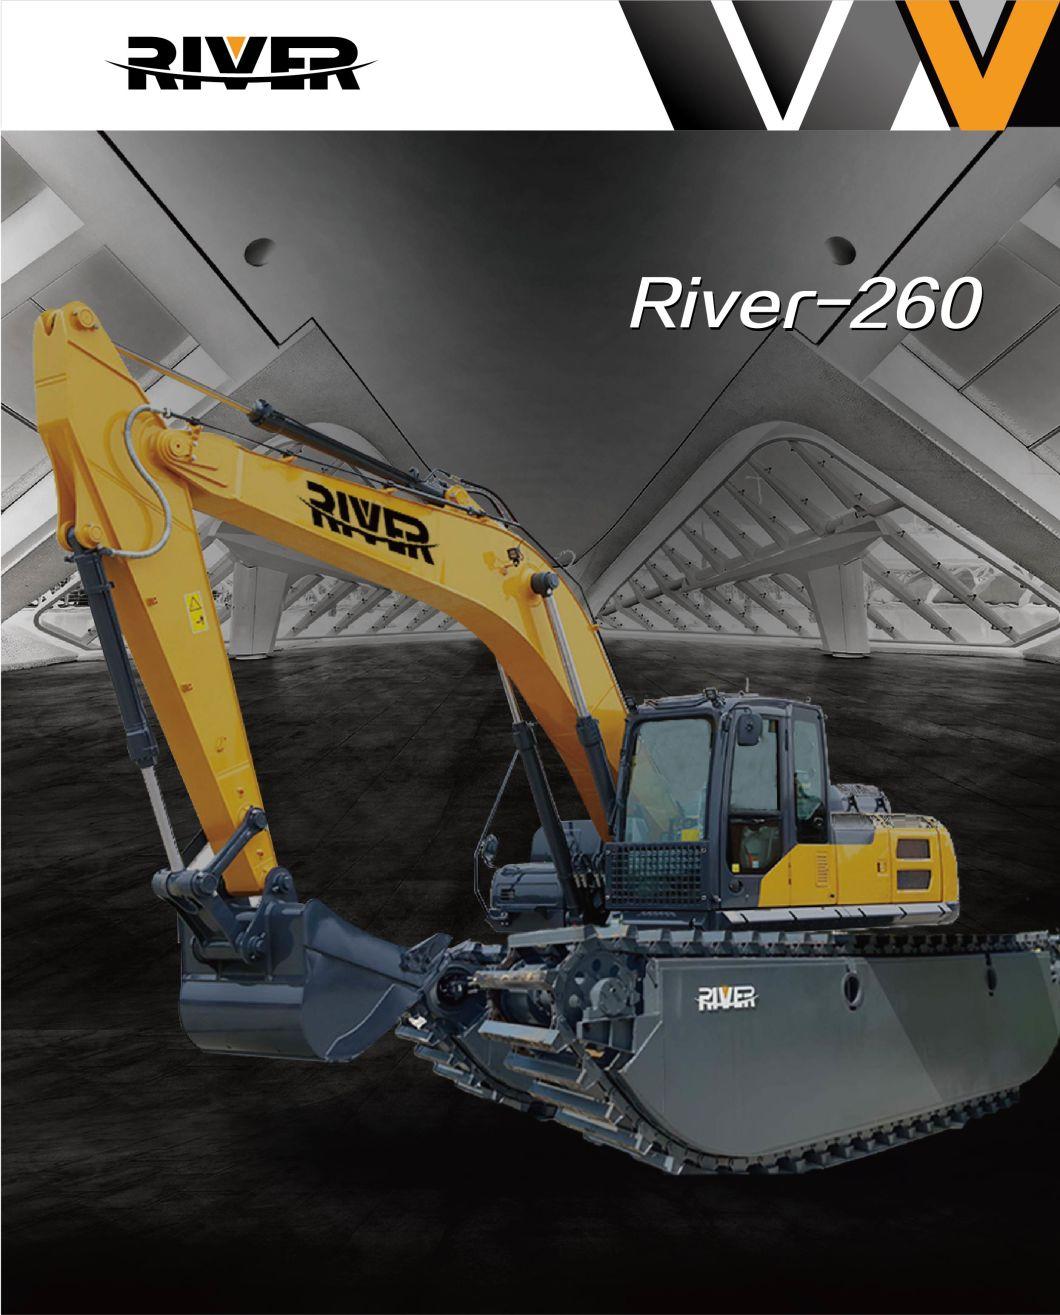 River-260 Amphibious Pontoon Excavator Non Mini Excavator Digger Brand New Not Used Excavator Flexible in Swamp Canal Wetland Lake for Sale Factory Price